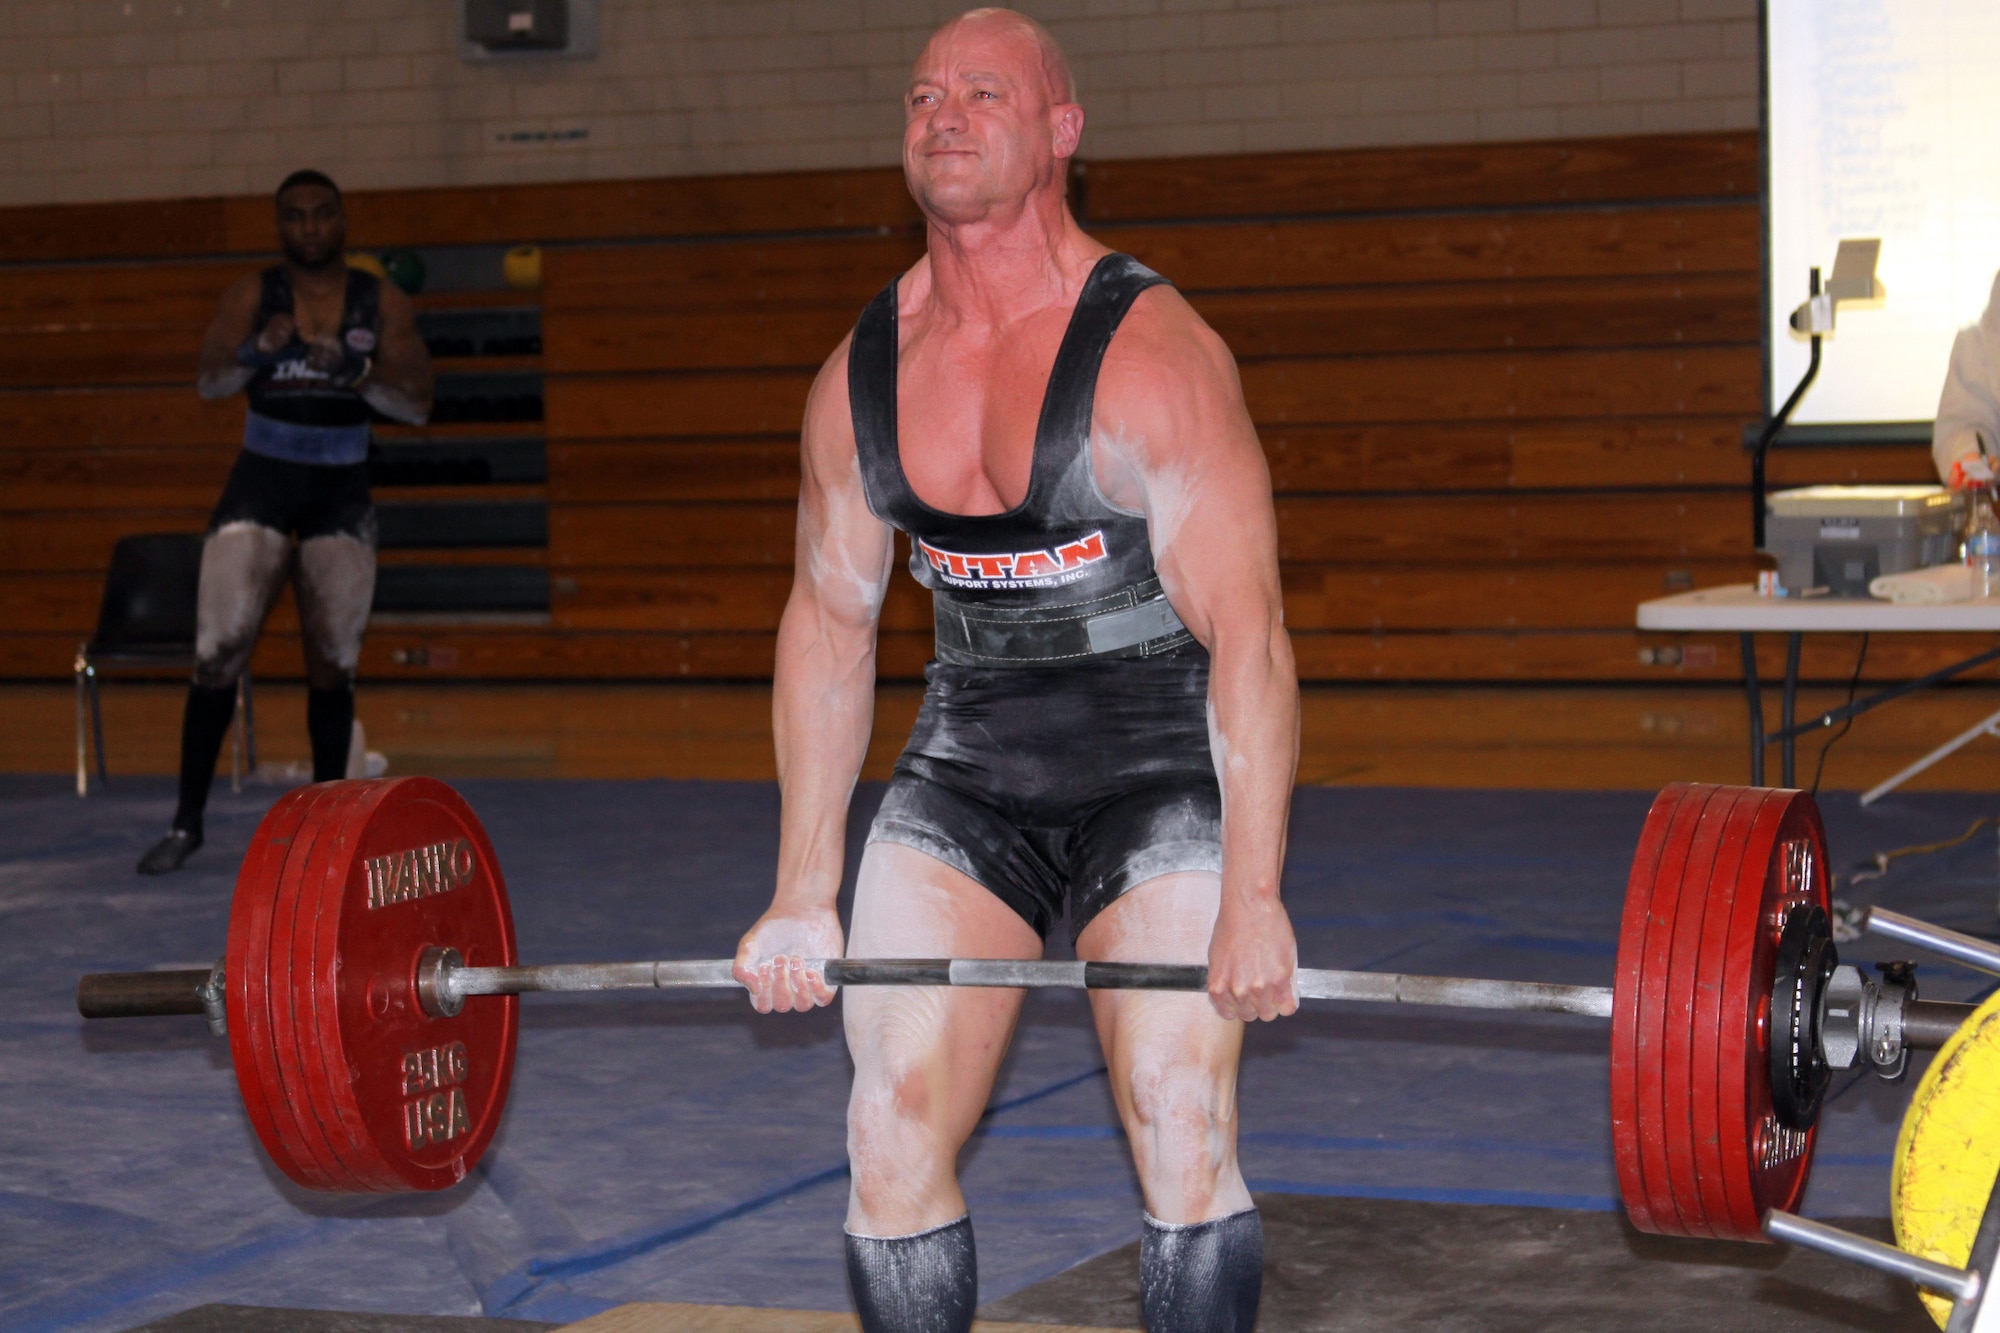 Senior Master Sgt. Troy Saunders sets a deadlift record of 633 pounds in the 198 pound class at an American Raw Masters competition.  At the 2011 Raw World Powerlifting Championships, he lifted a record 1,492 pounds.  Saunders holds 21 military national weightlifting records and eight American powerlifting records.  A chief master sergeant select, he is the vehicle fleet manager for Air Mobility Command and is stationed at Scott Air Force Base, Ill.  (Courtesy Photo)